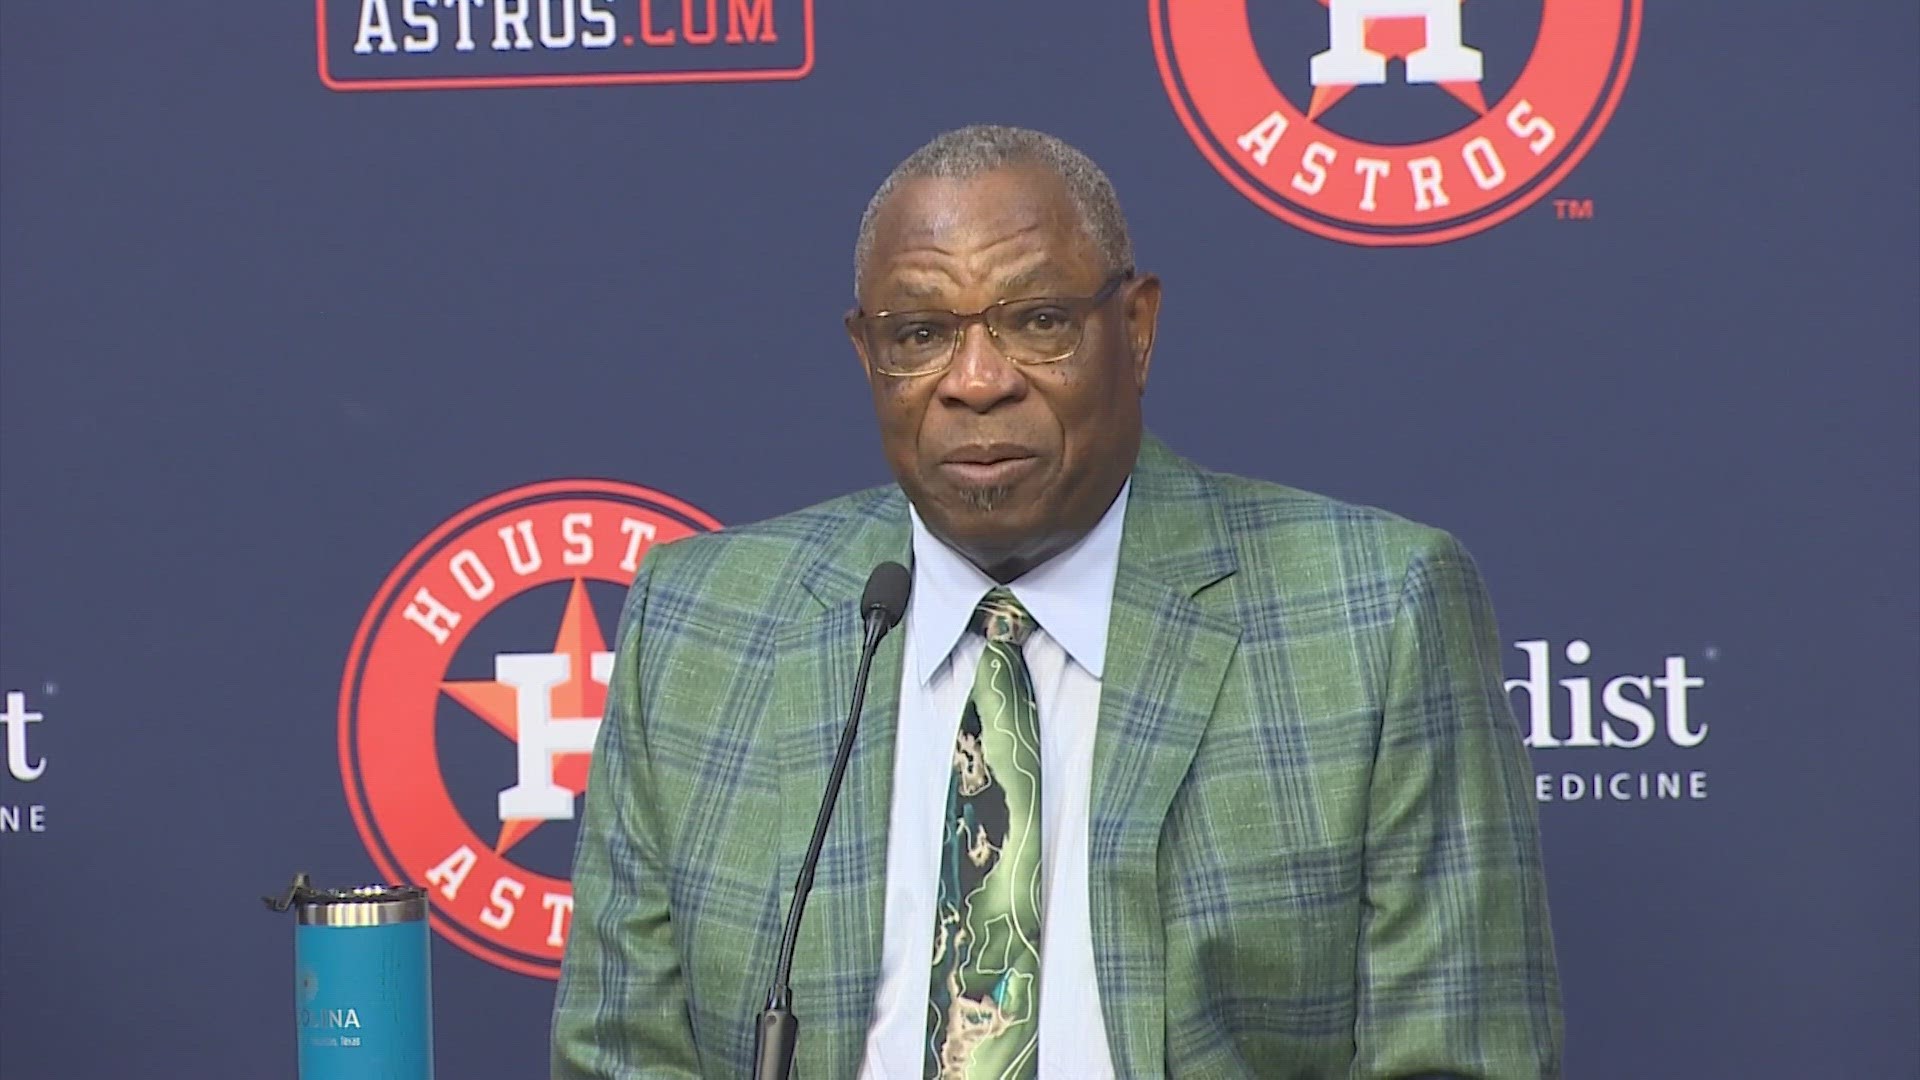 Dusty Baker's old-school decisions pay off for Astros in ALCS win